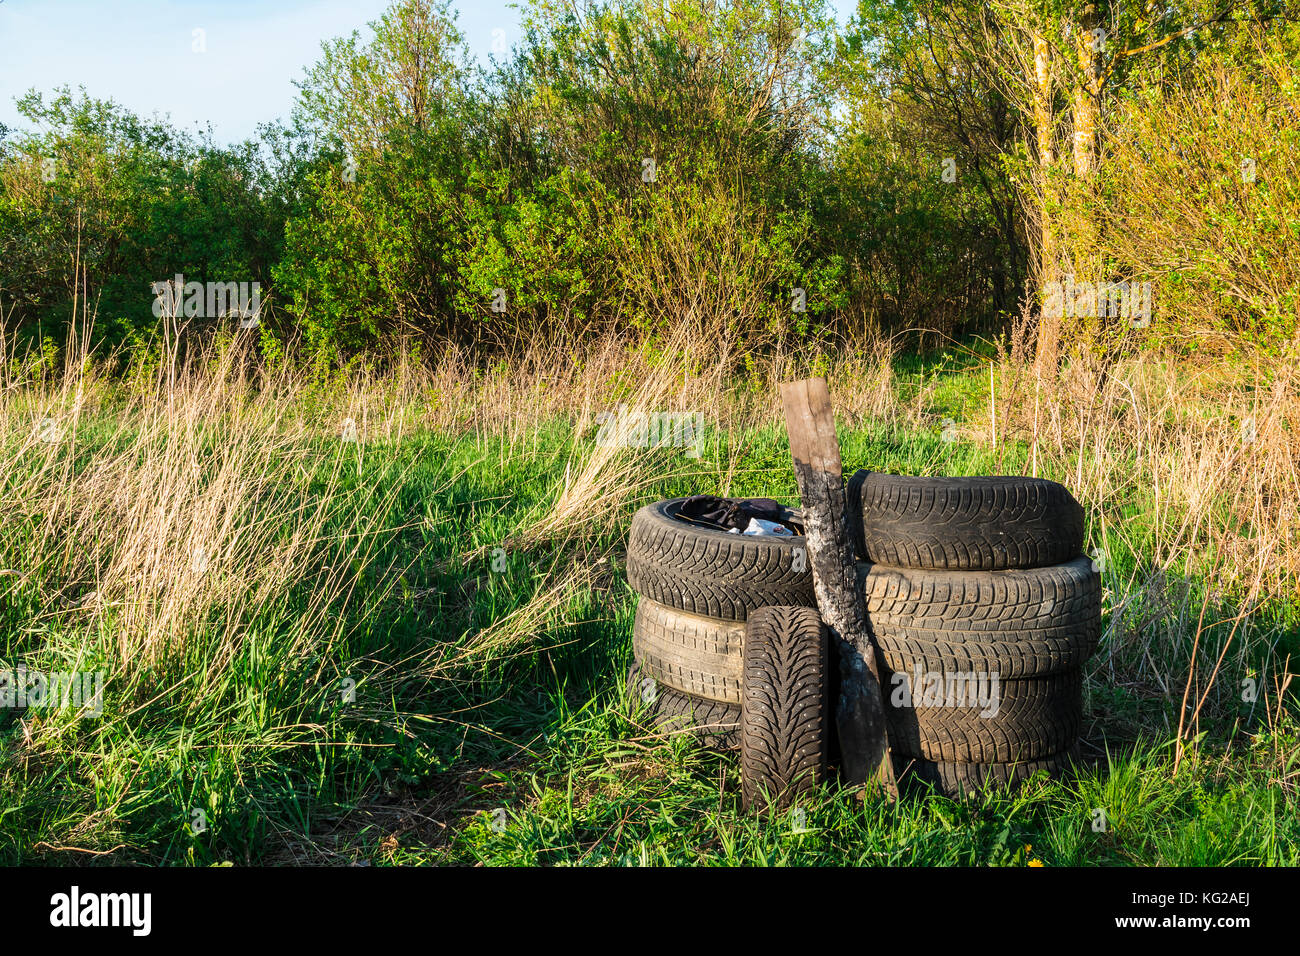 A stack of old tires and charred plank on grass in forest at sunny day Stock Photo